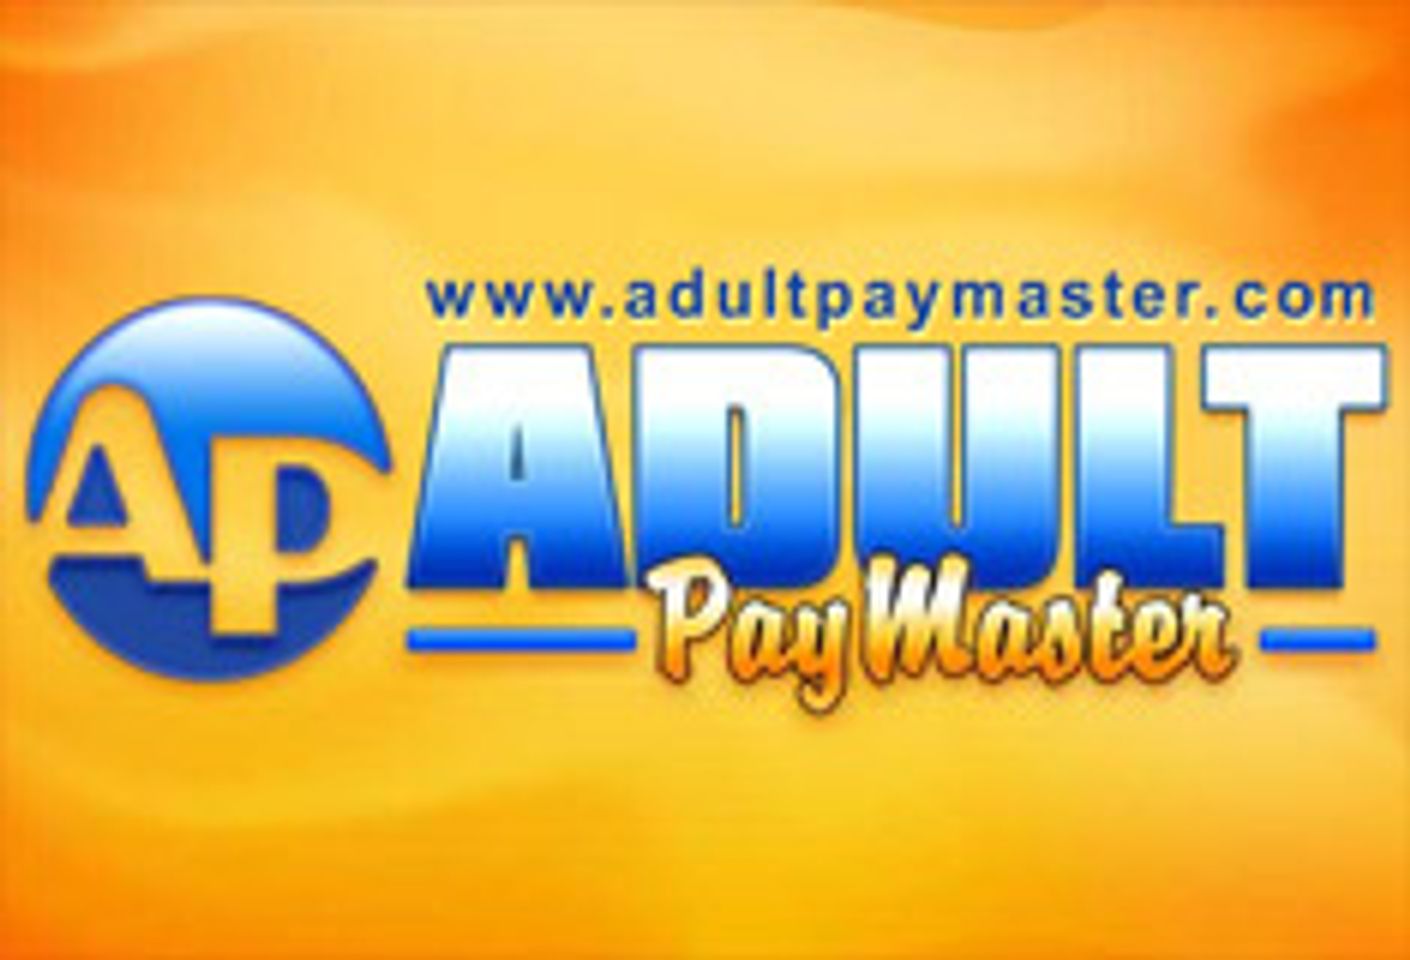 Adult PayMaster: Seven New Niche Sites